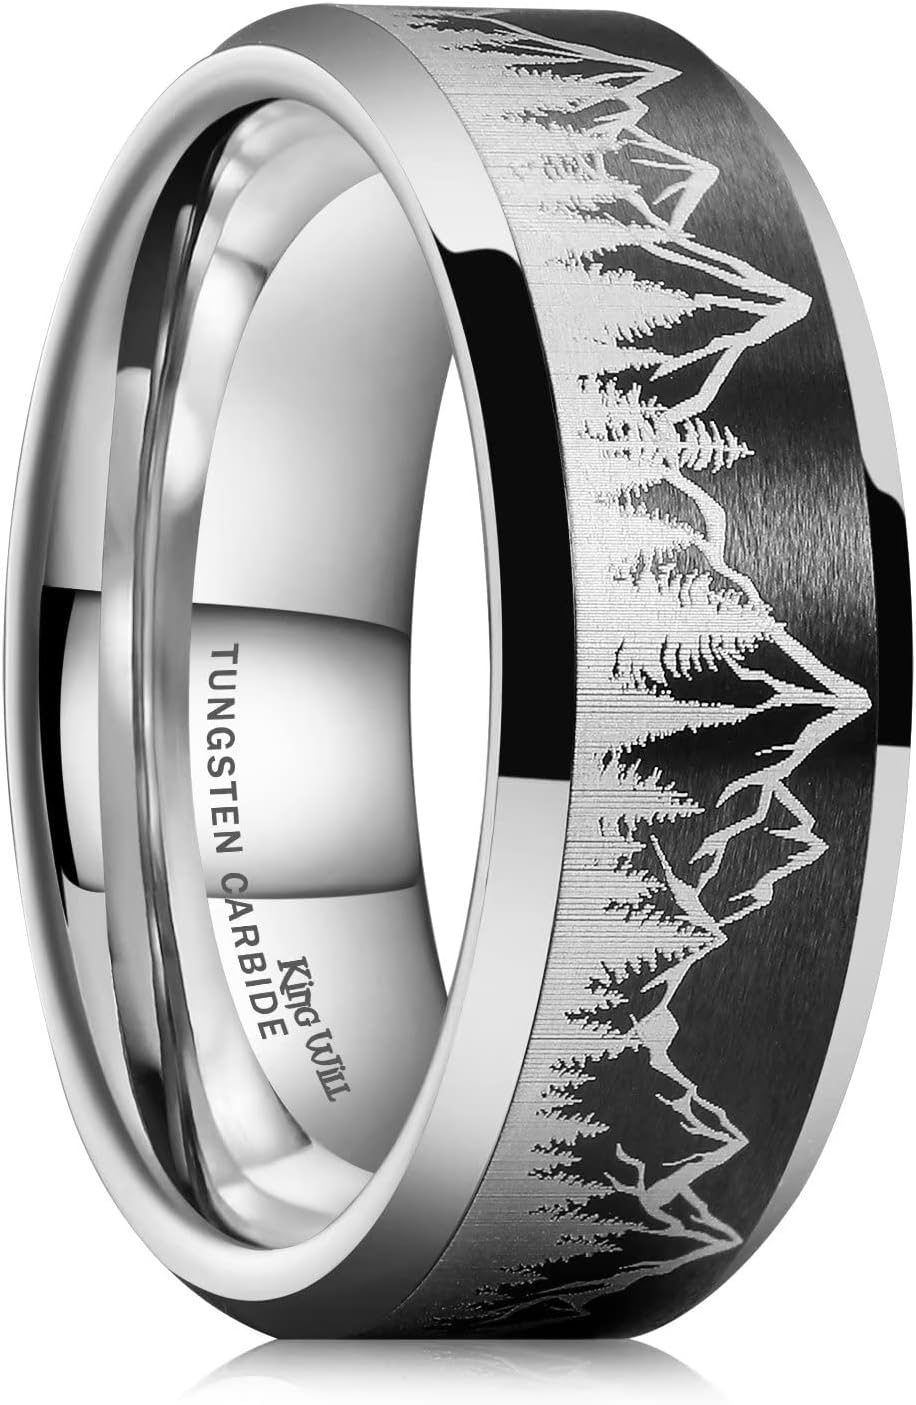 King Will Mens 6mm 8mm Black Silver Tungsten Carbide Wedding Ring Inlaid Lasered Seagull/Forest Landscap/Panda/Deer/Hunting/Fly Fishing Brushed Wedding Rings for Men Women